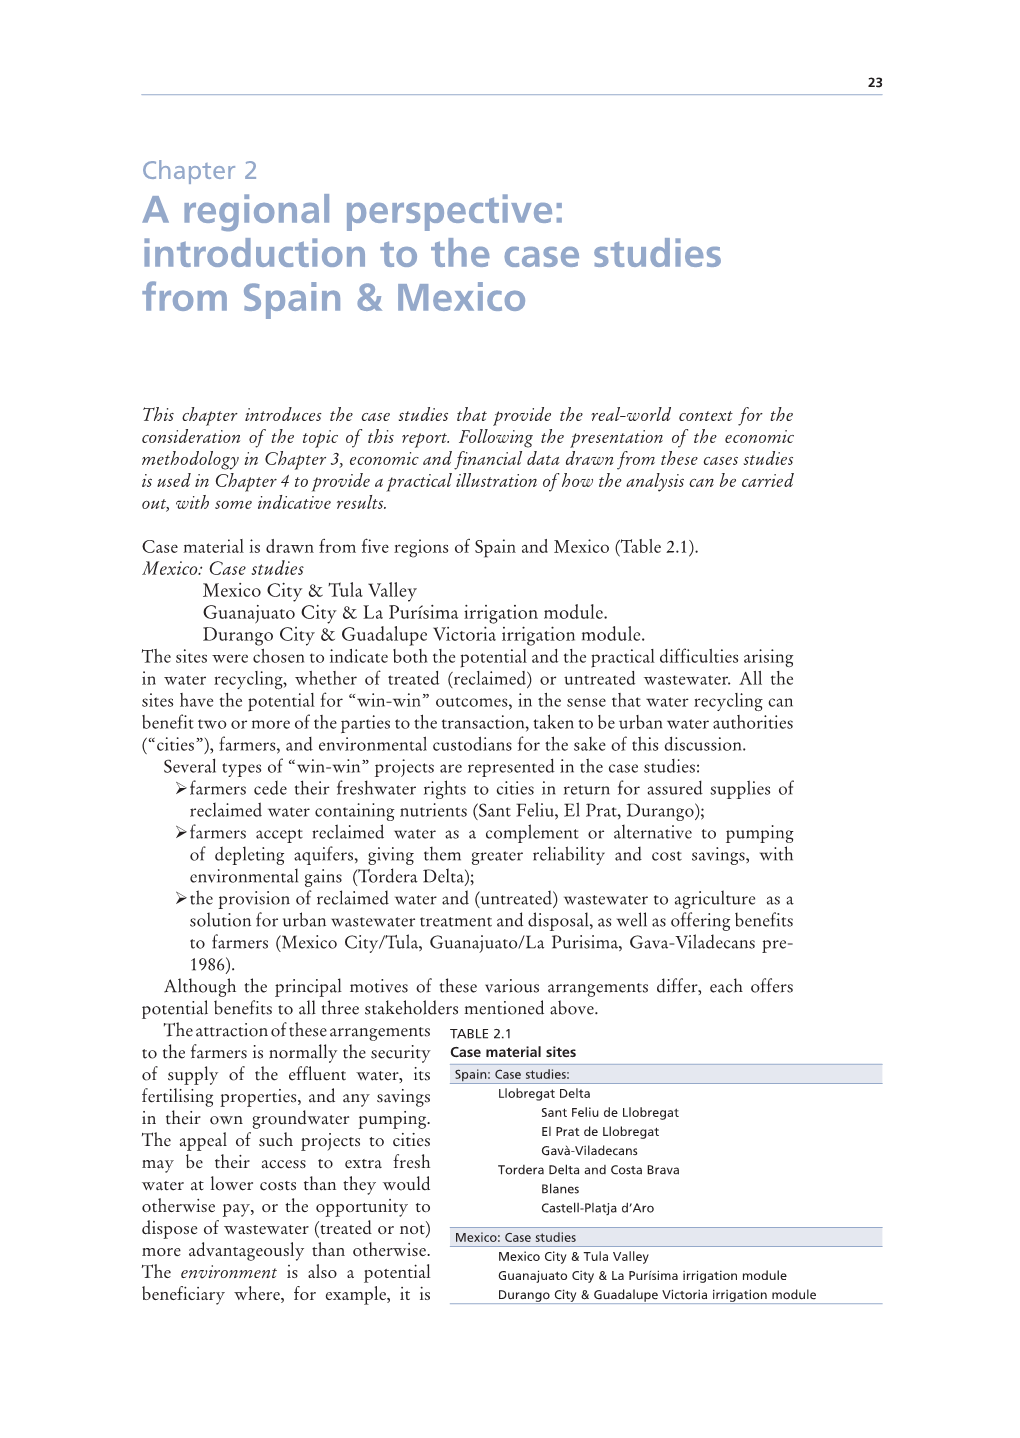 A Regional Perspective: Introduction to the Case Studies from Spain & Mexico